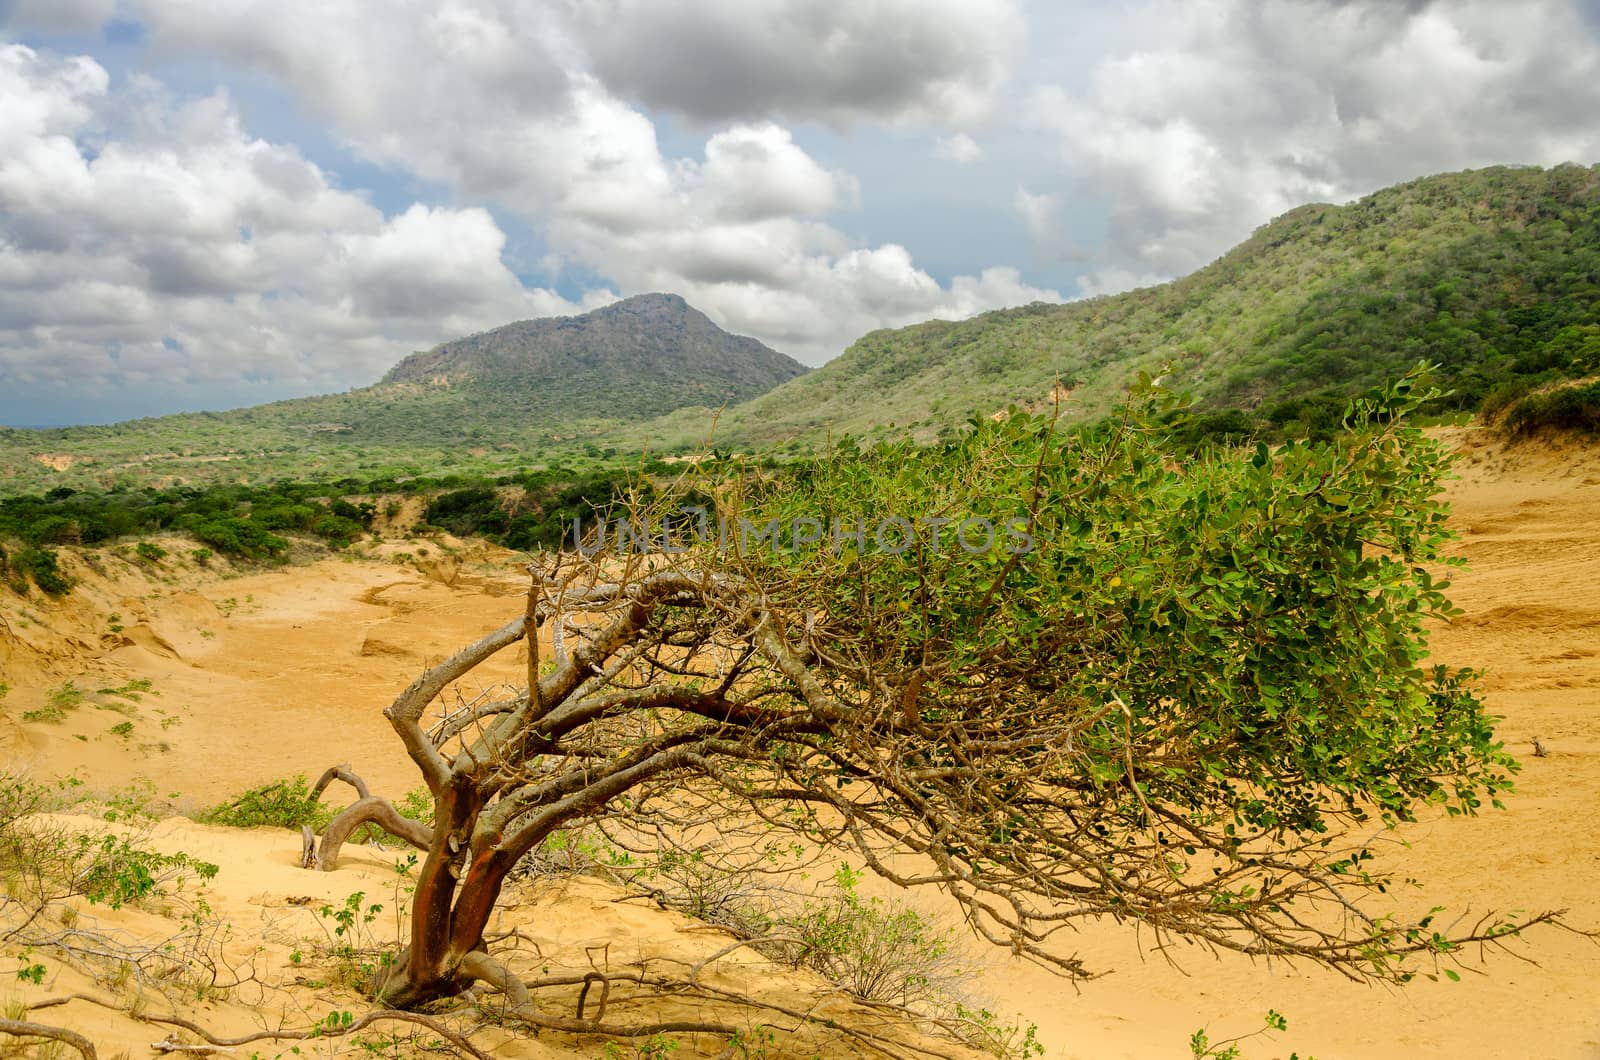 Tree struggling to grow next to a sand dune in Macuira National Park in La Guajira, Colombia